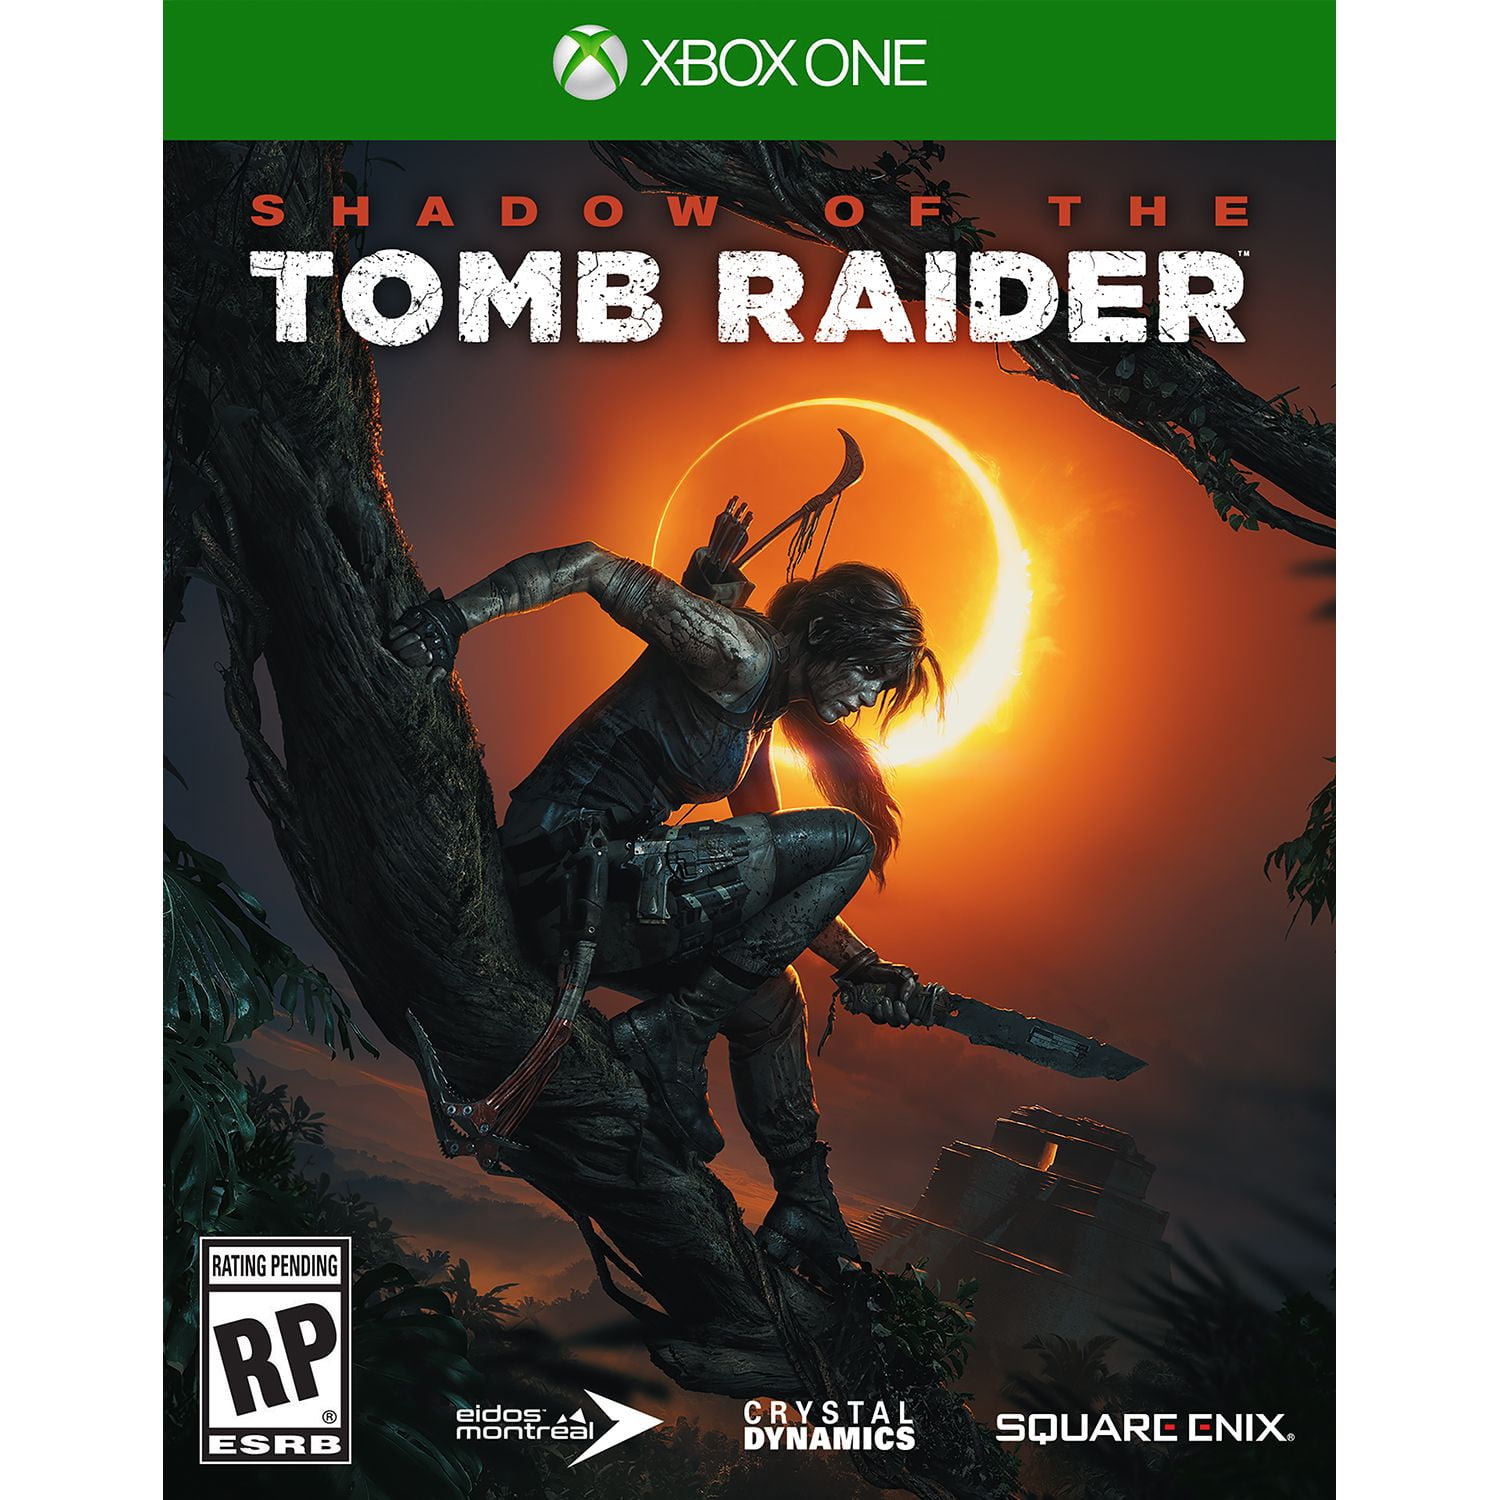 Xbox Game Pass - World War Z: Aftermath, Tomb Raider, Clone Drone, Remnant  1/2, SteamWorld Build, Rollerdrome out now